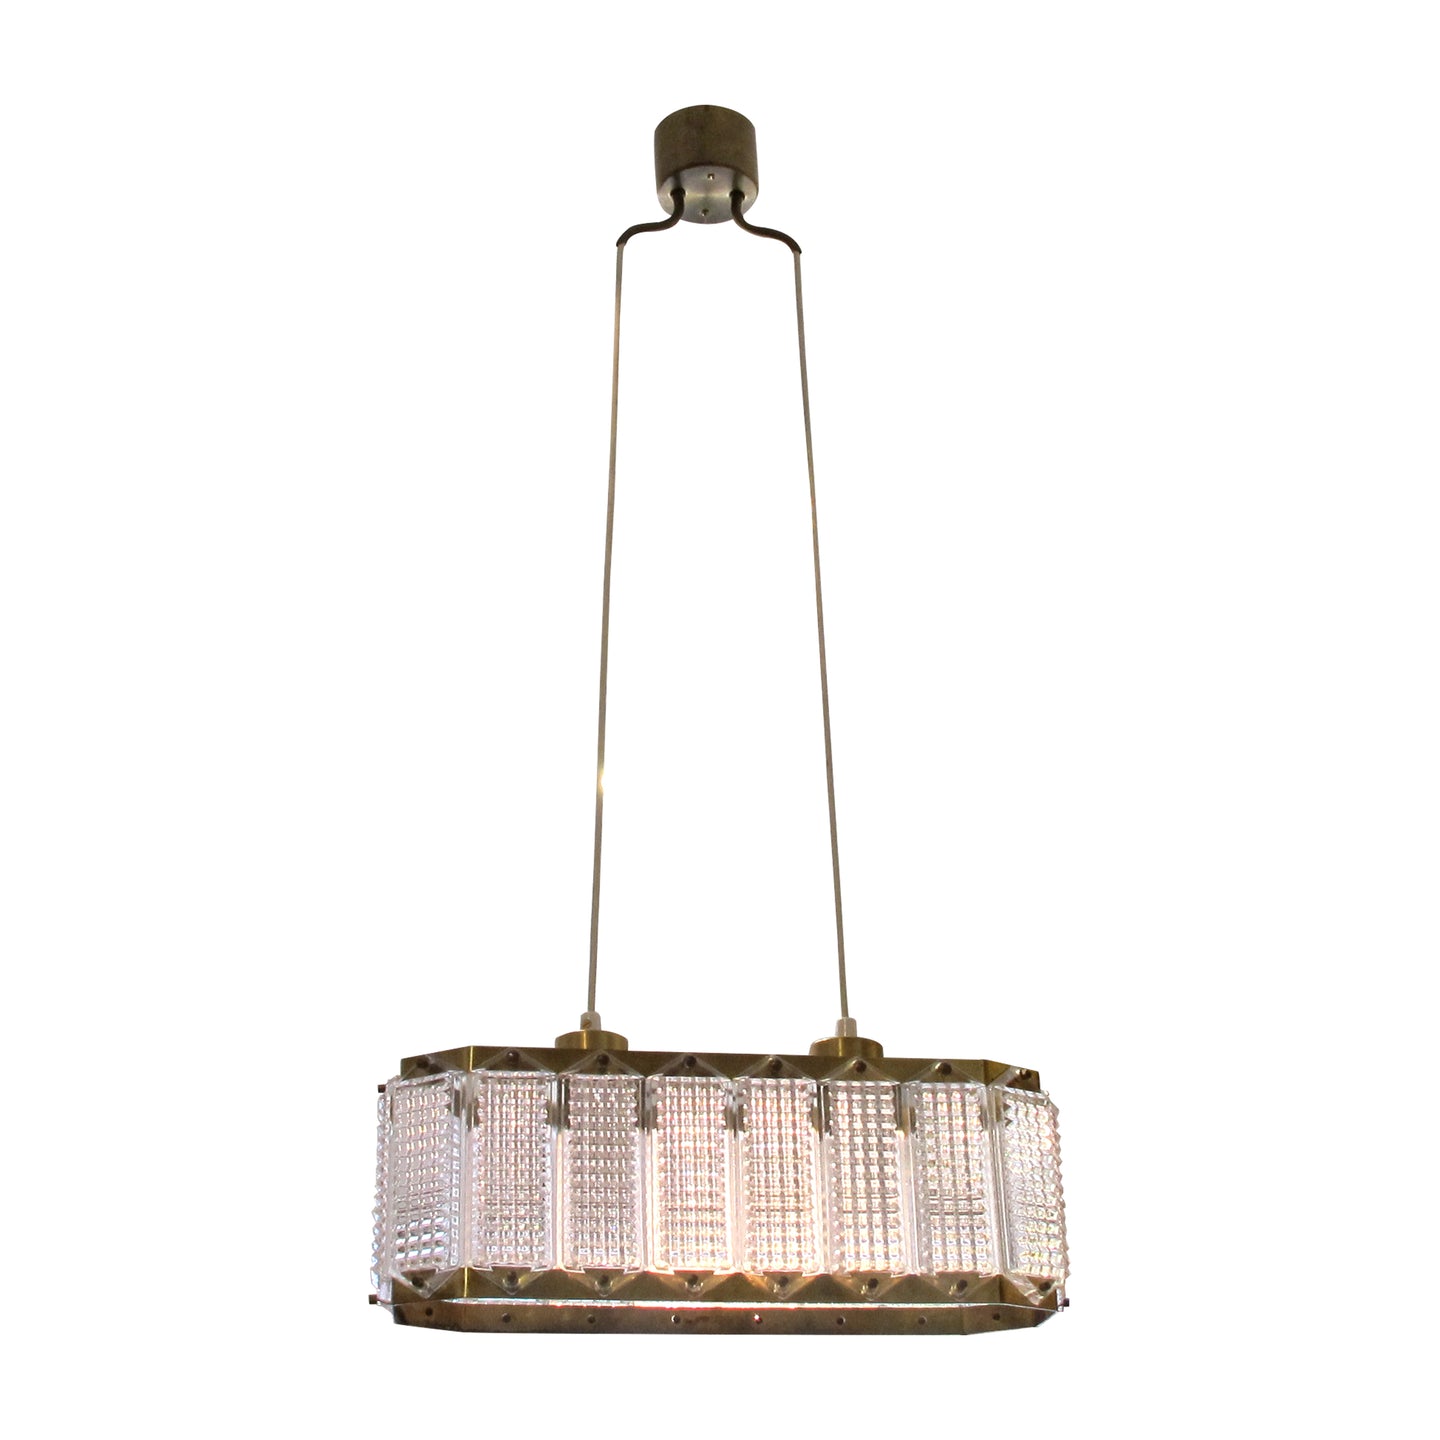 1960s Scandinavian Prism Moulded Glass and Brass rectangular Ceiling Light